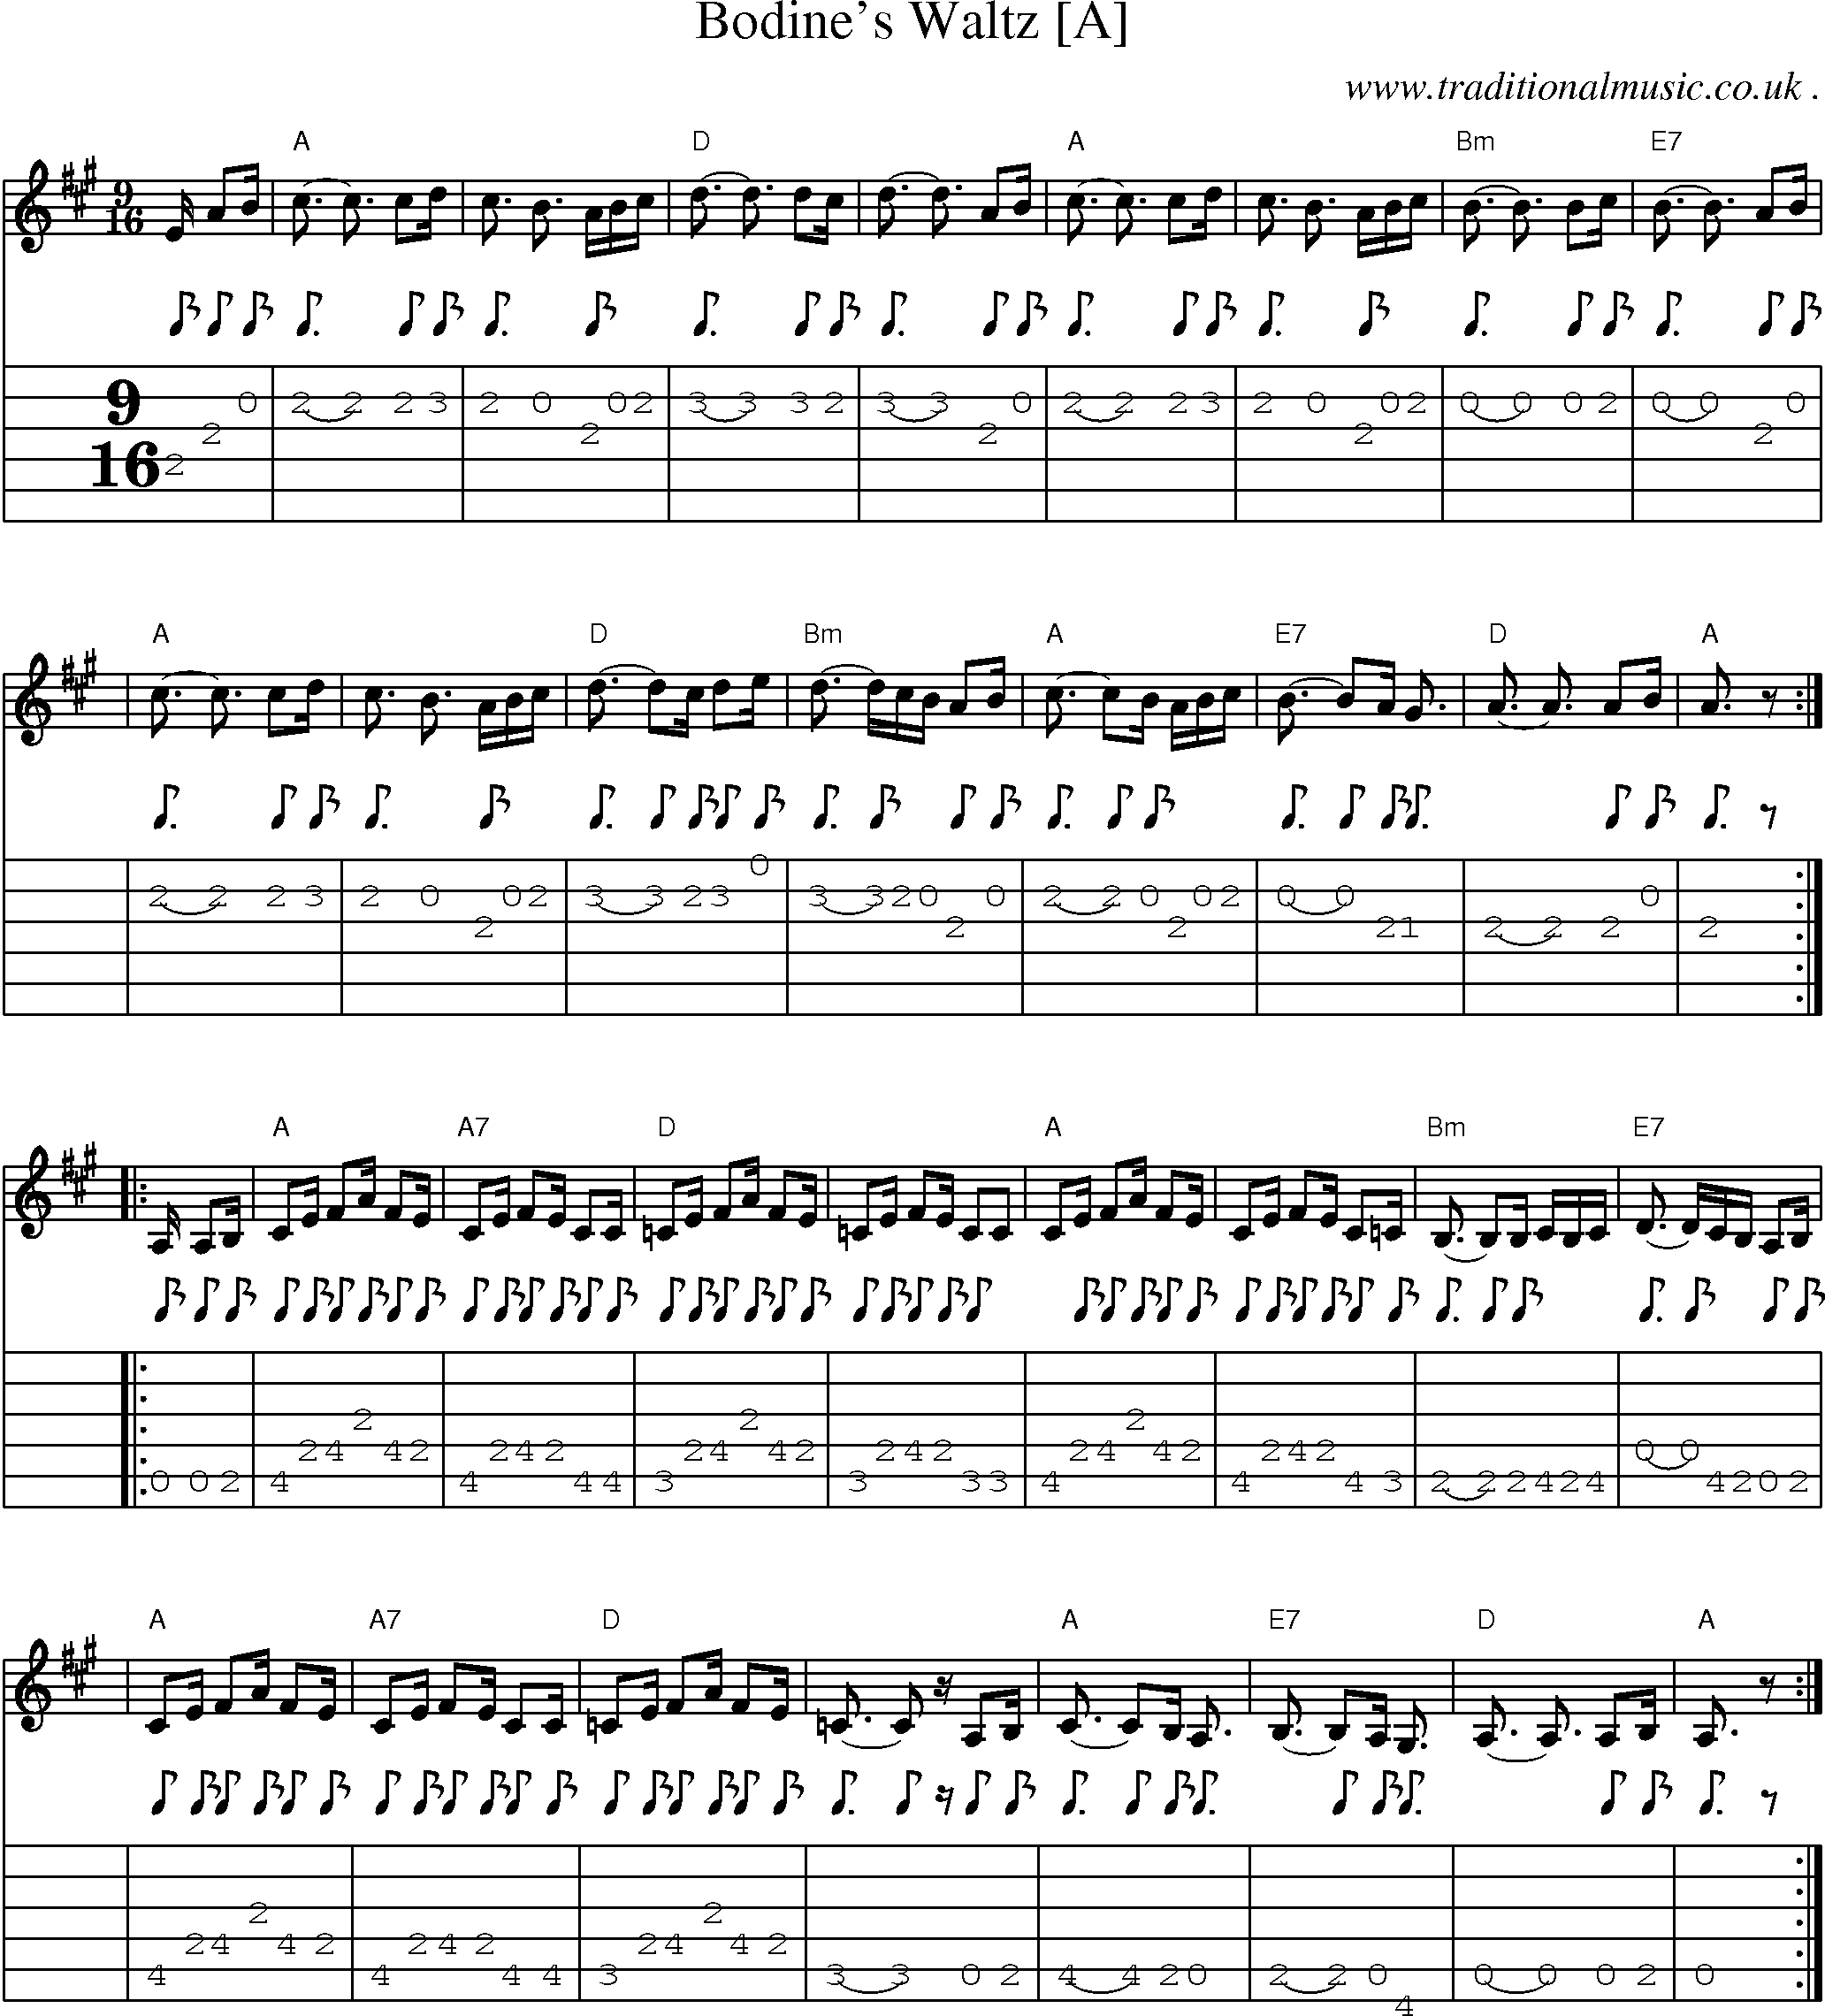 Music Score and Guitar Tabs for Bodines Waltz [a]